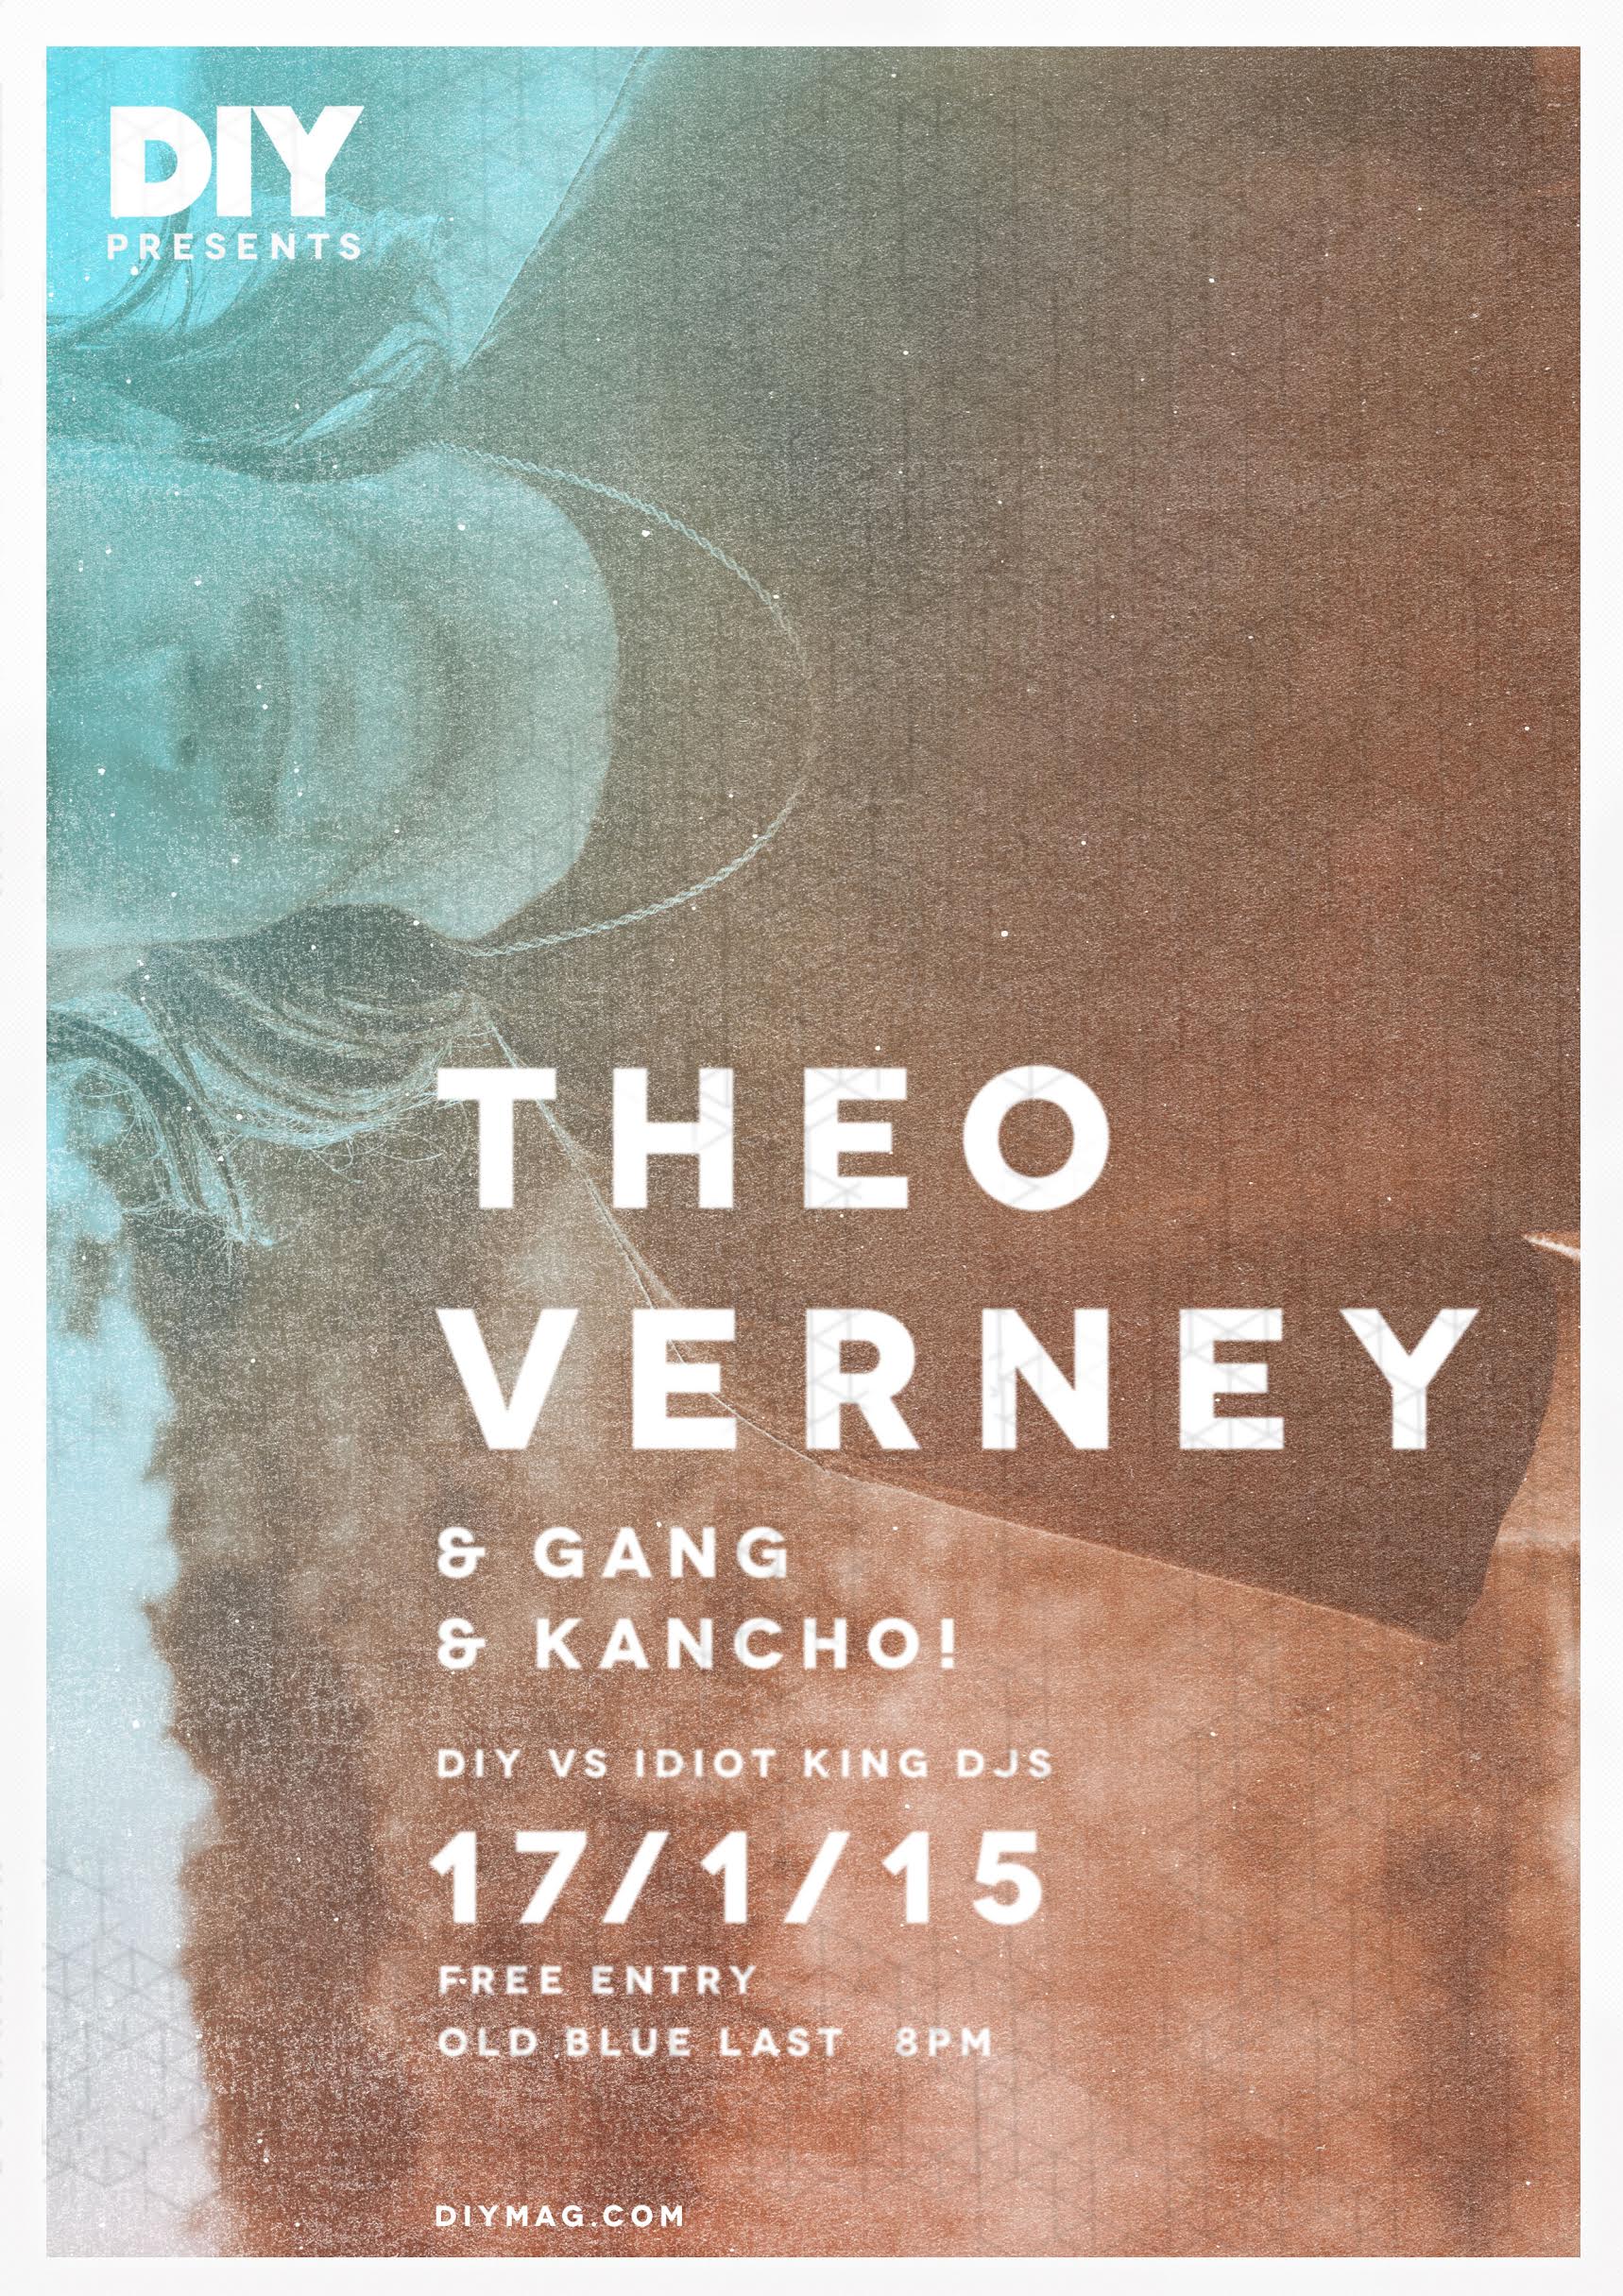 Theo Verney to headline DIY Presents gig in 2015